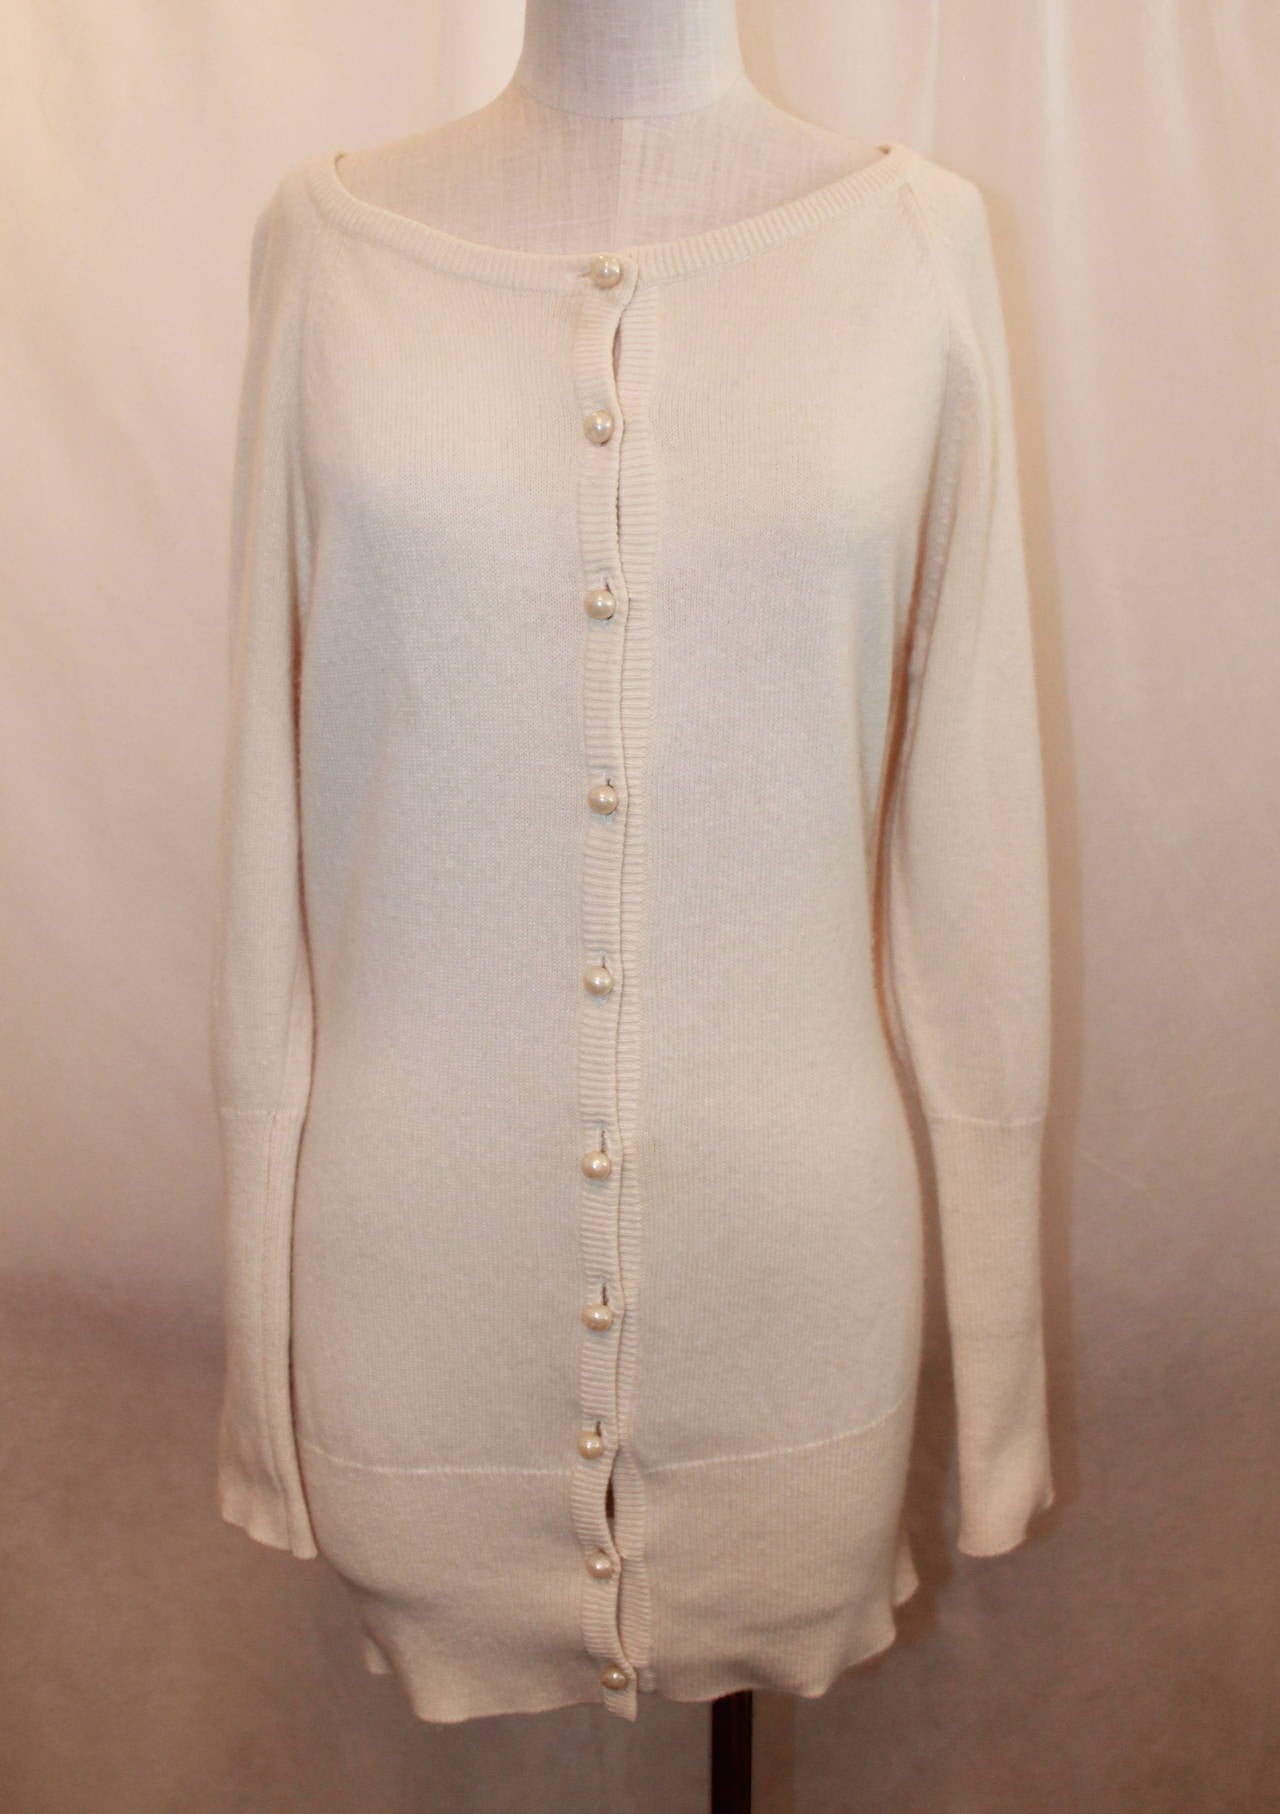 Chanel 1980's Vintage Creme Cashmere Sweater with Pearl Buttons - L. This sweater is in excellent vintage condition with very minor wear. It is 100% cashmere.

Measurements:
Bust- 36